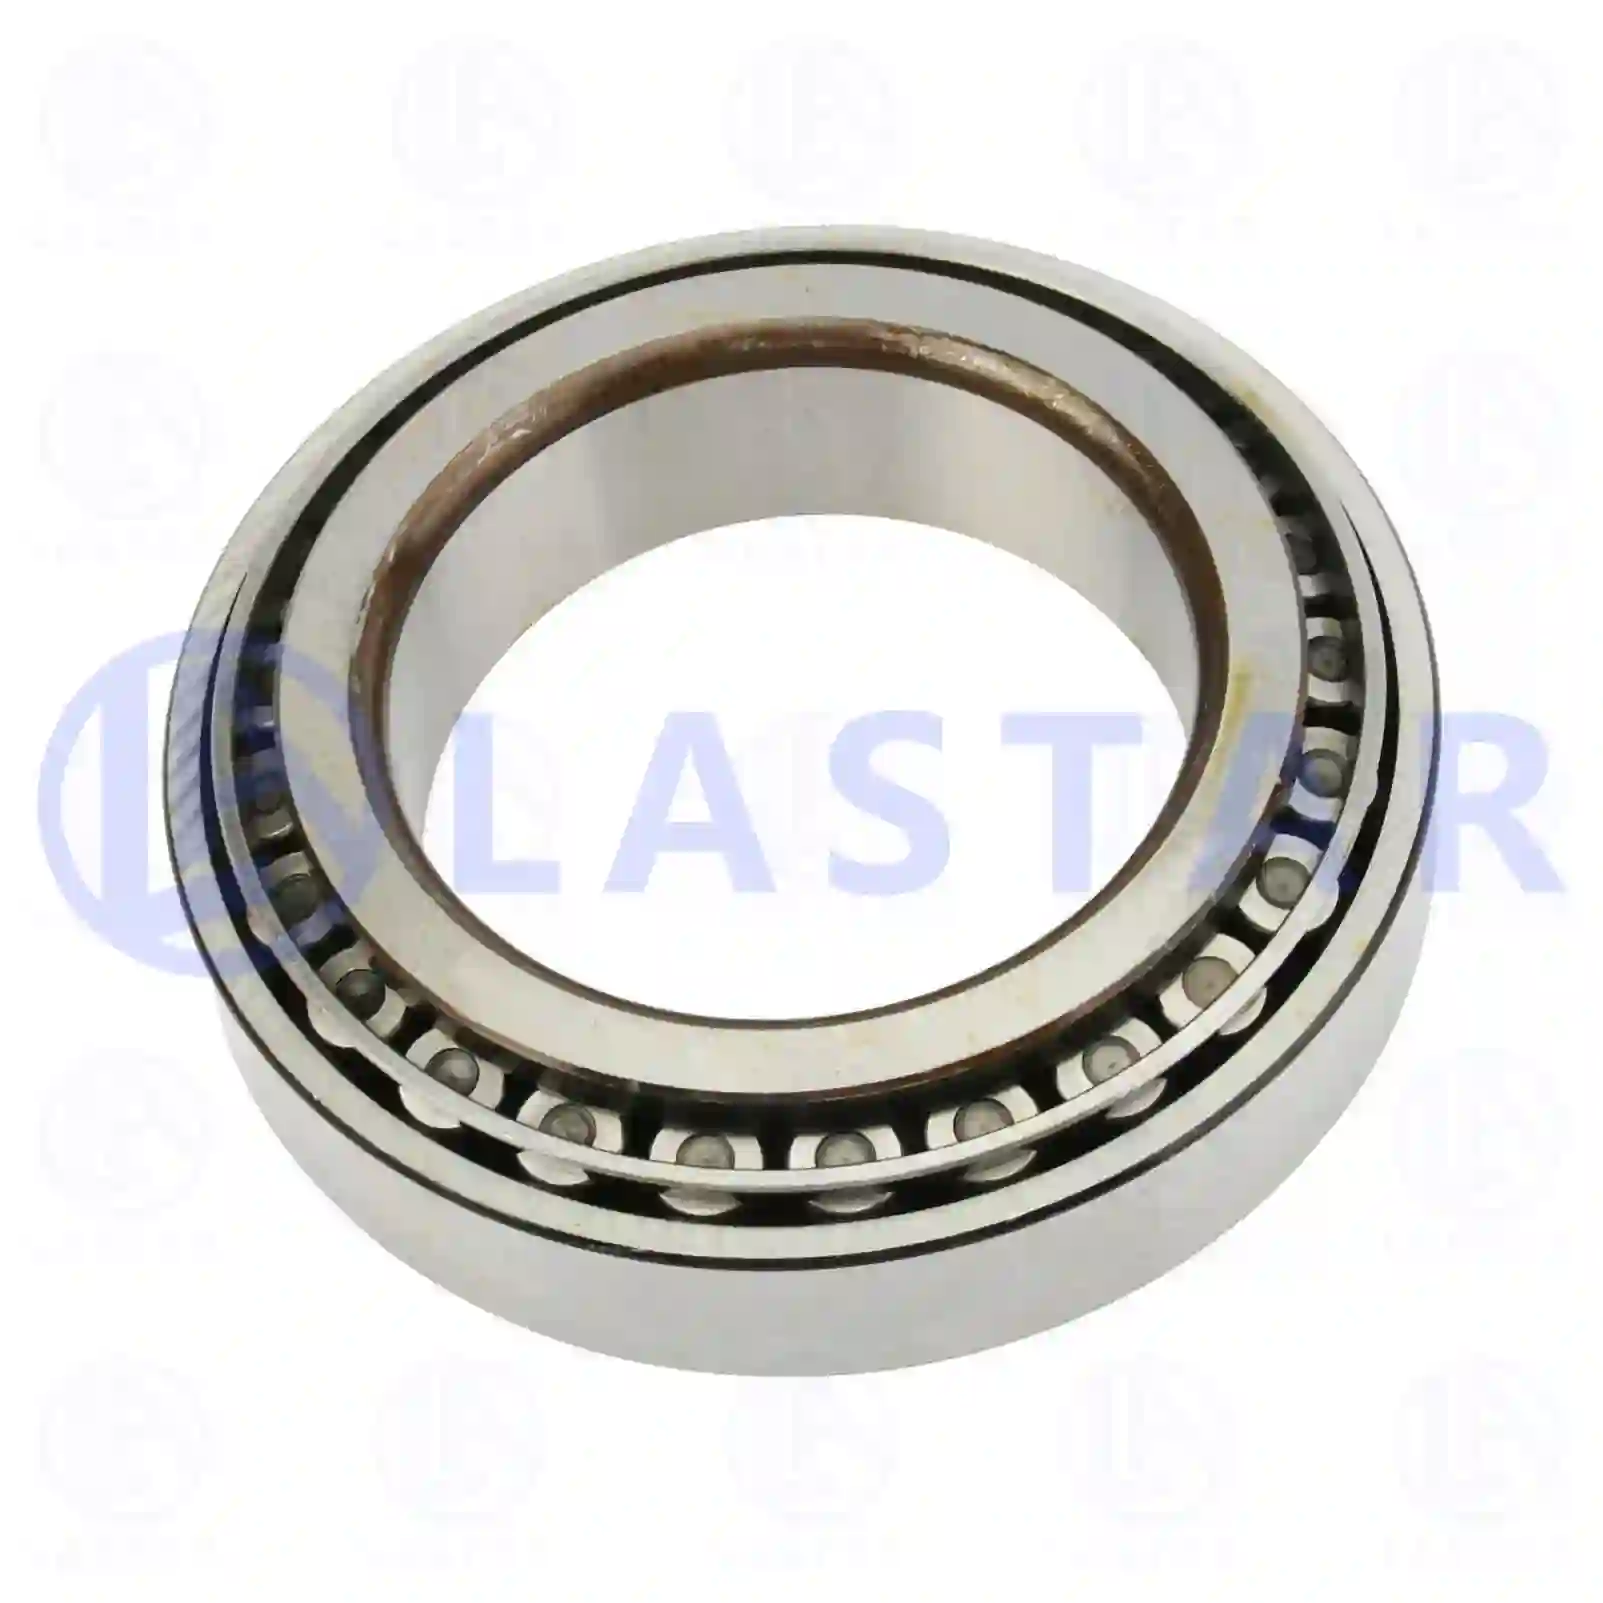 Tapered roller bearing, 77731140, 181298S, 2W0501319, ZG02992-0008 ||  77731140 Lastar Spare Part | Truck Spare Parts, Auotomotive Spare Parts Tapered roller bearing, 77731140, 181298S, 2W0501319, ZG02992-0008 ||  77731140 Lastar Spare Part | Truck Spare Parts, Auotomotive Spare Parts